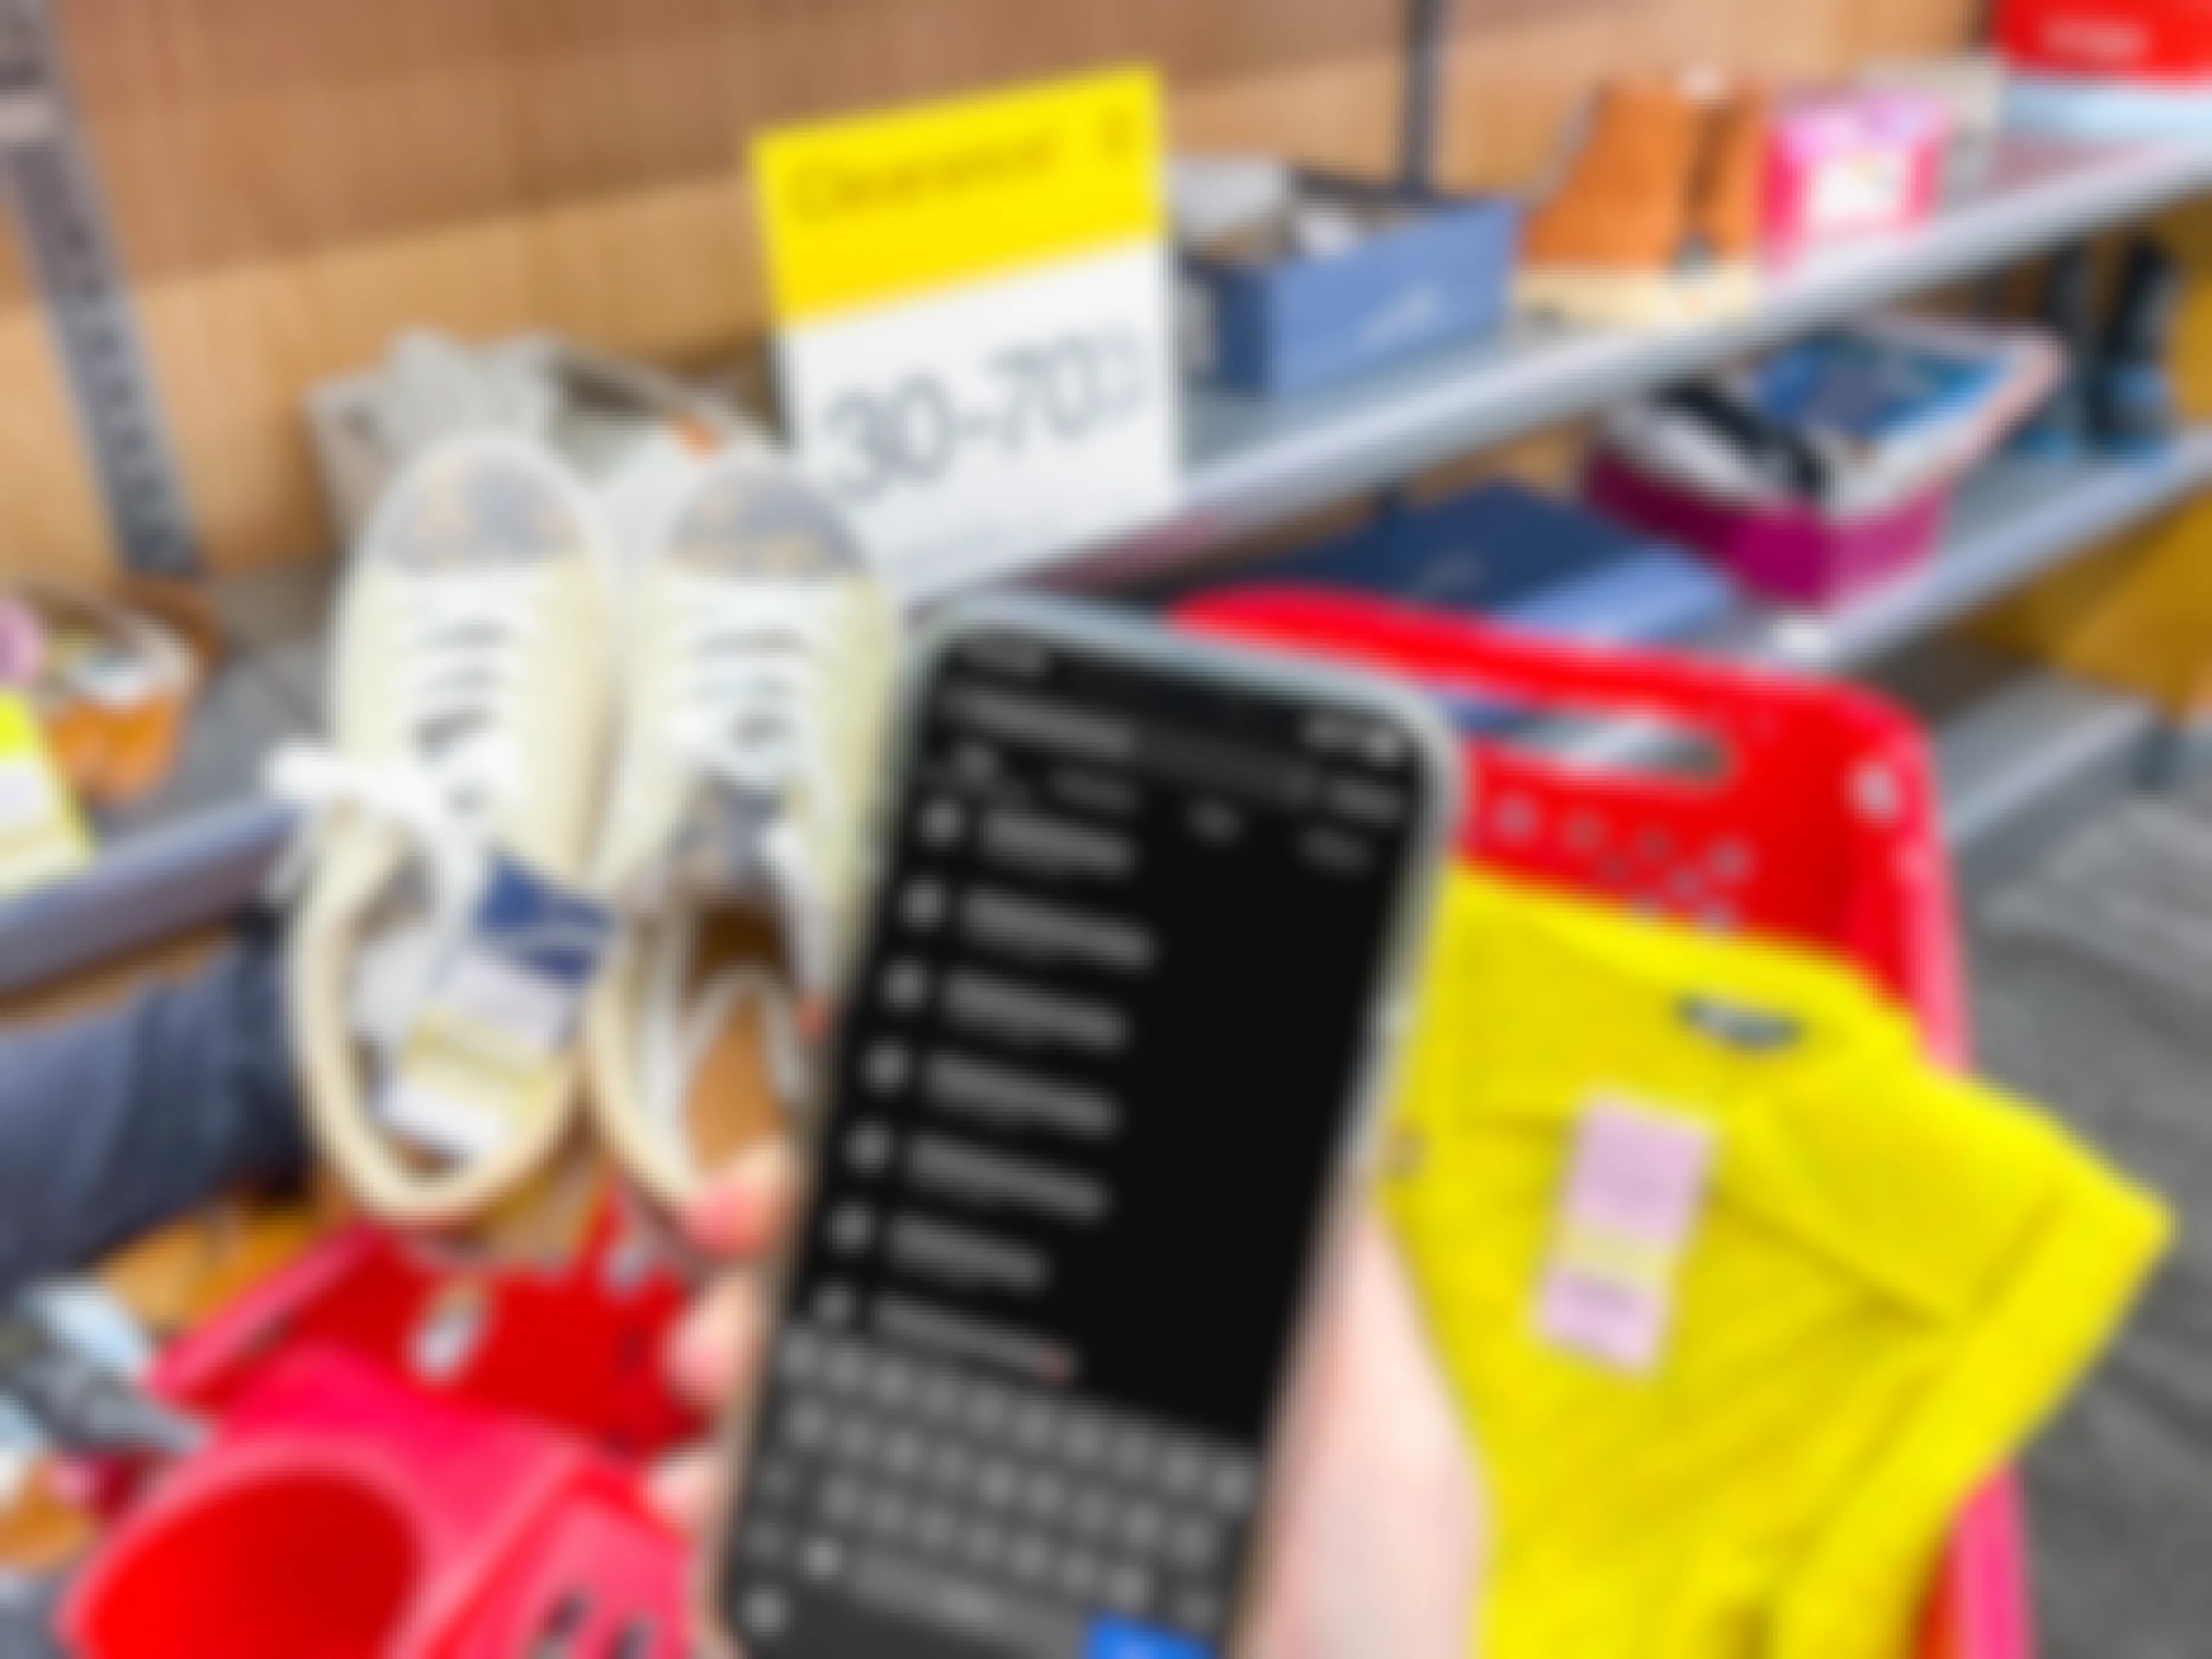 A person's hand holding up a cellphone displaying the search results for #targetclearance on Instagram in front of the clearance shoe section at Target and a sign advertising clearance as 30-70% off.